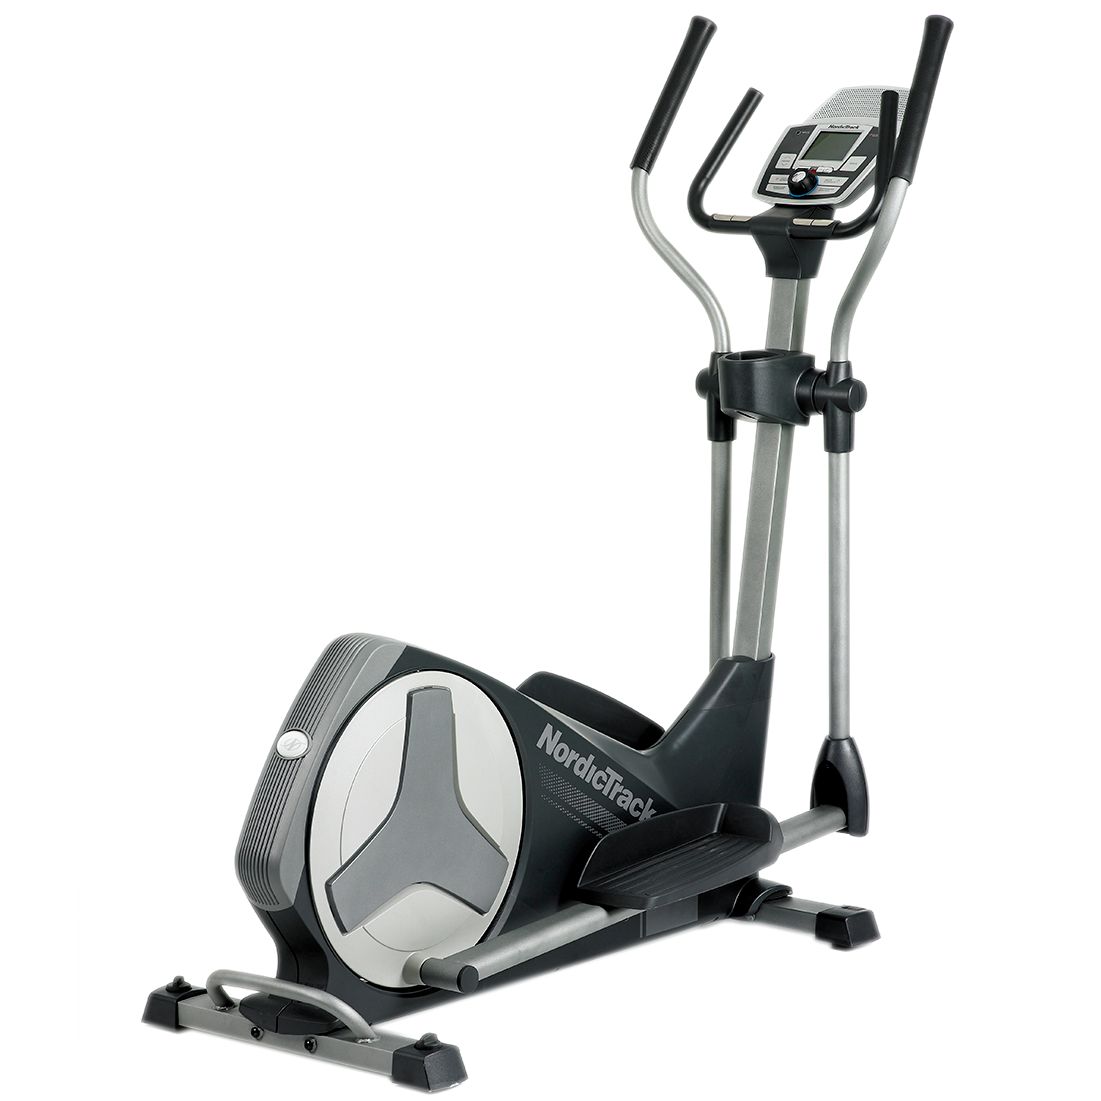 Nordic Track E9ZL iFit SD Elliptical Cross Trainer at John Lewis